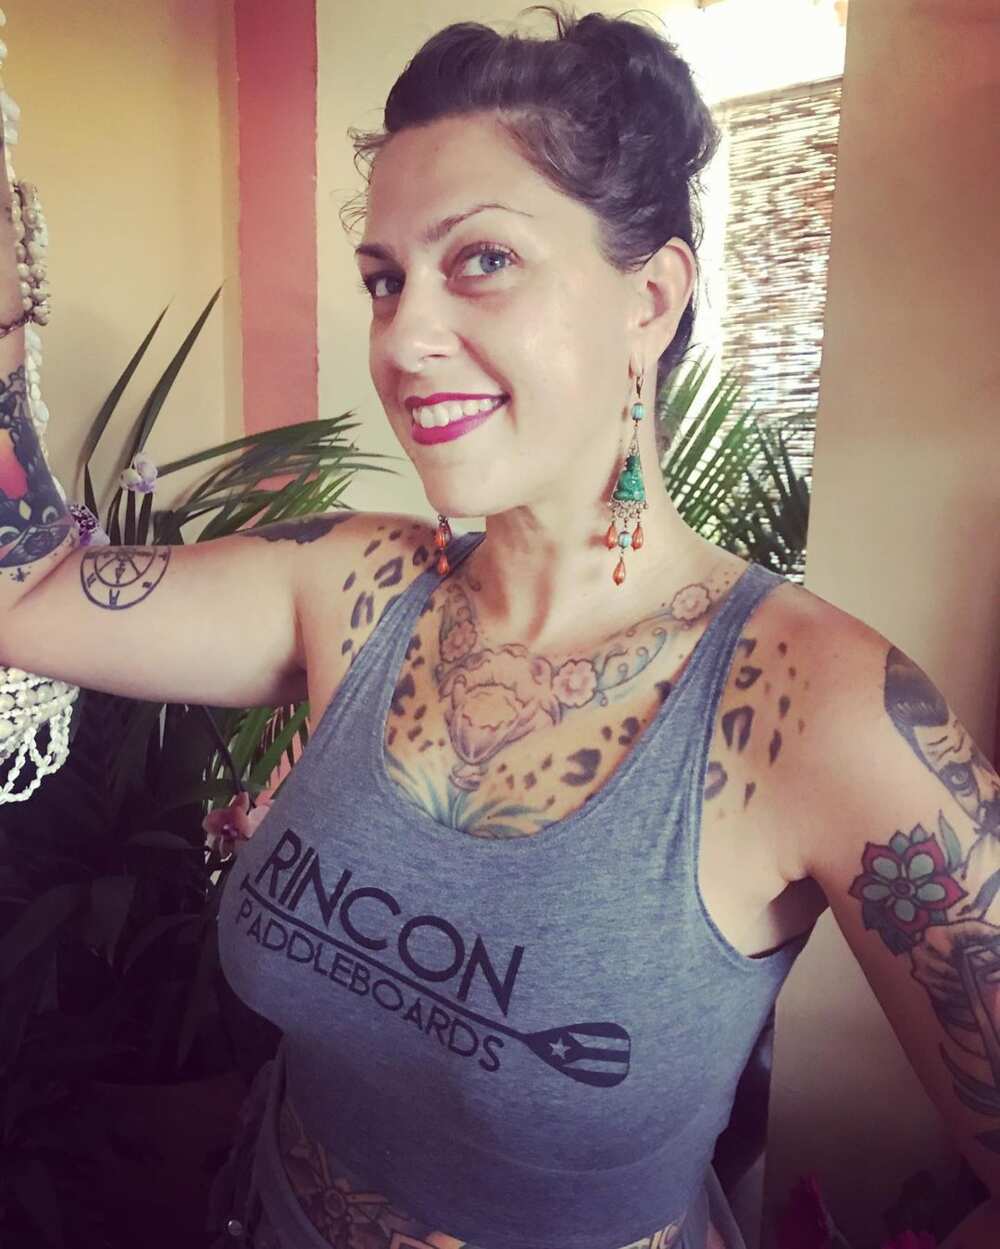 Is Danielle Colby married?